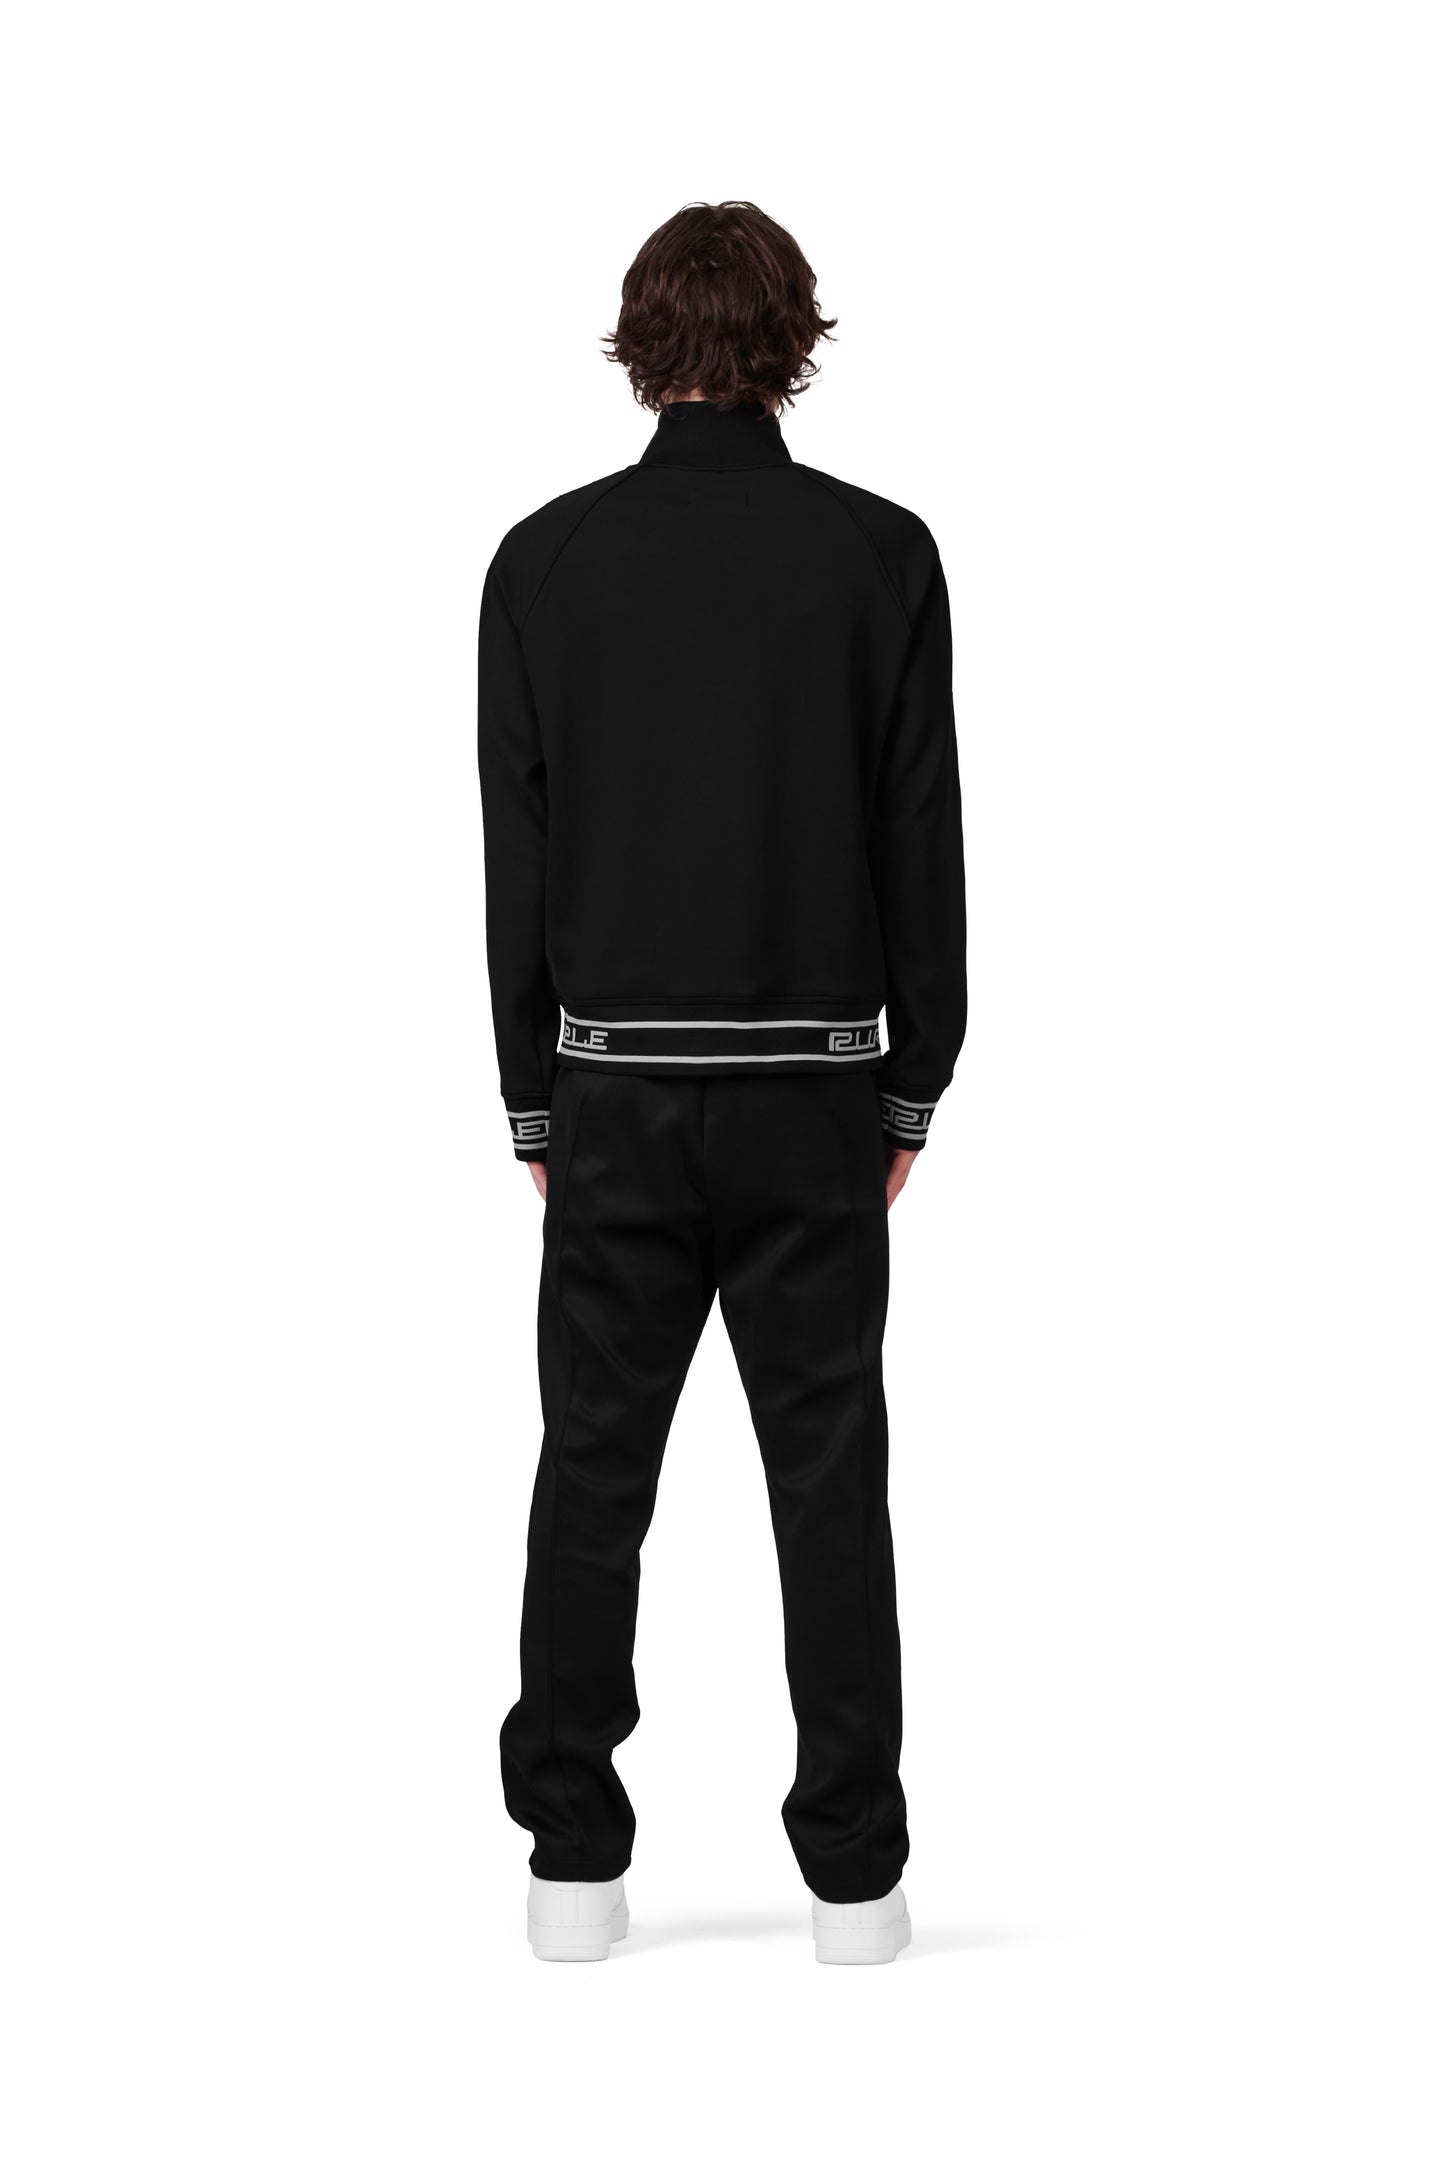 P415 TRACK PANT - Solid Poly Tricot Black Track Pant